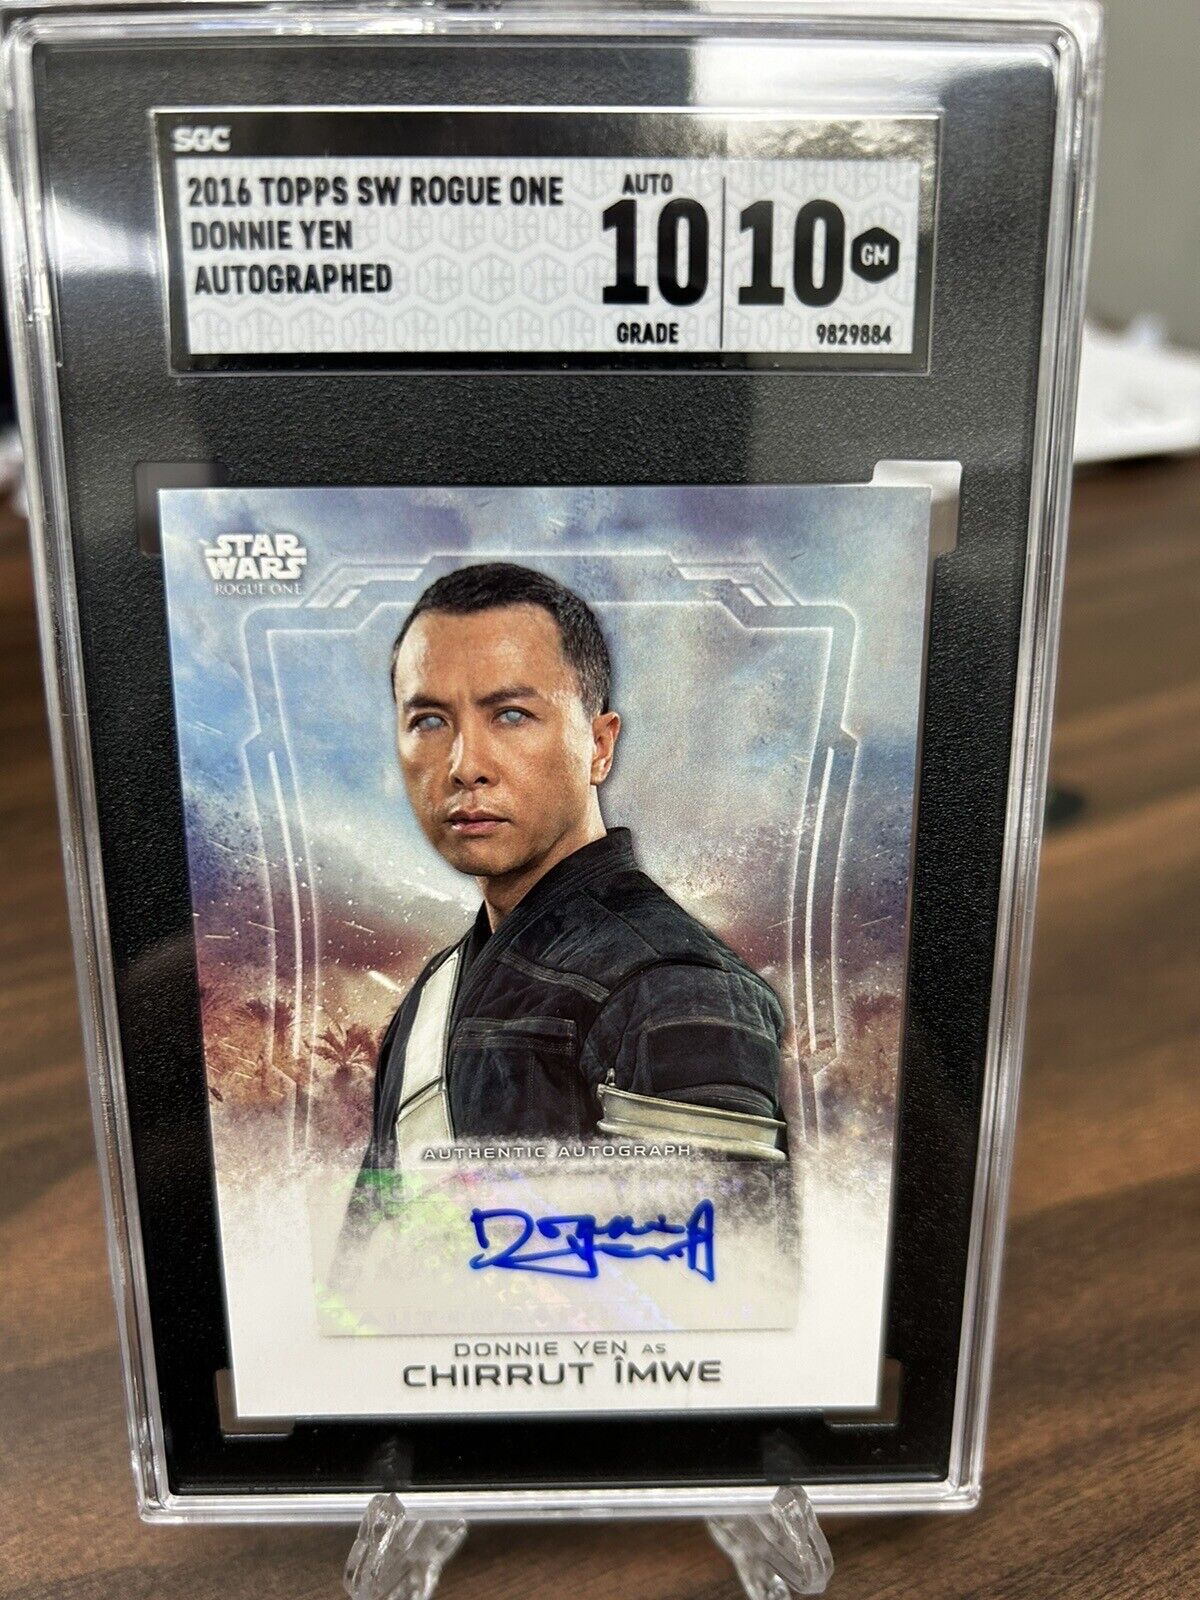 2016 Topps Star Wars Rogue One autograph auto Donnie Yen as CHIRRUT IMWE